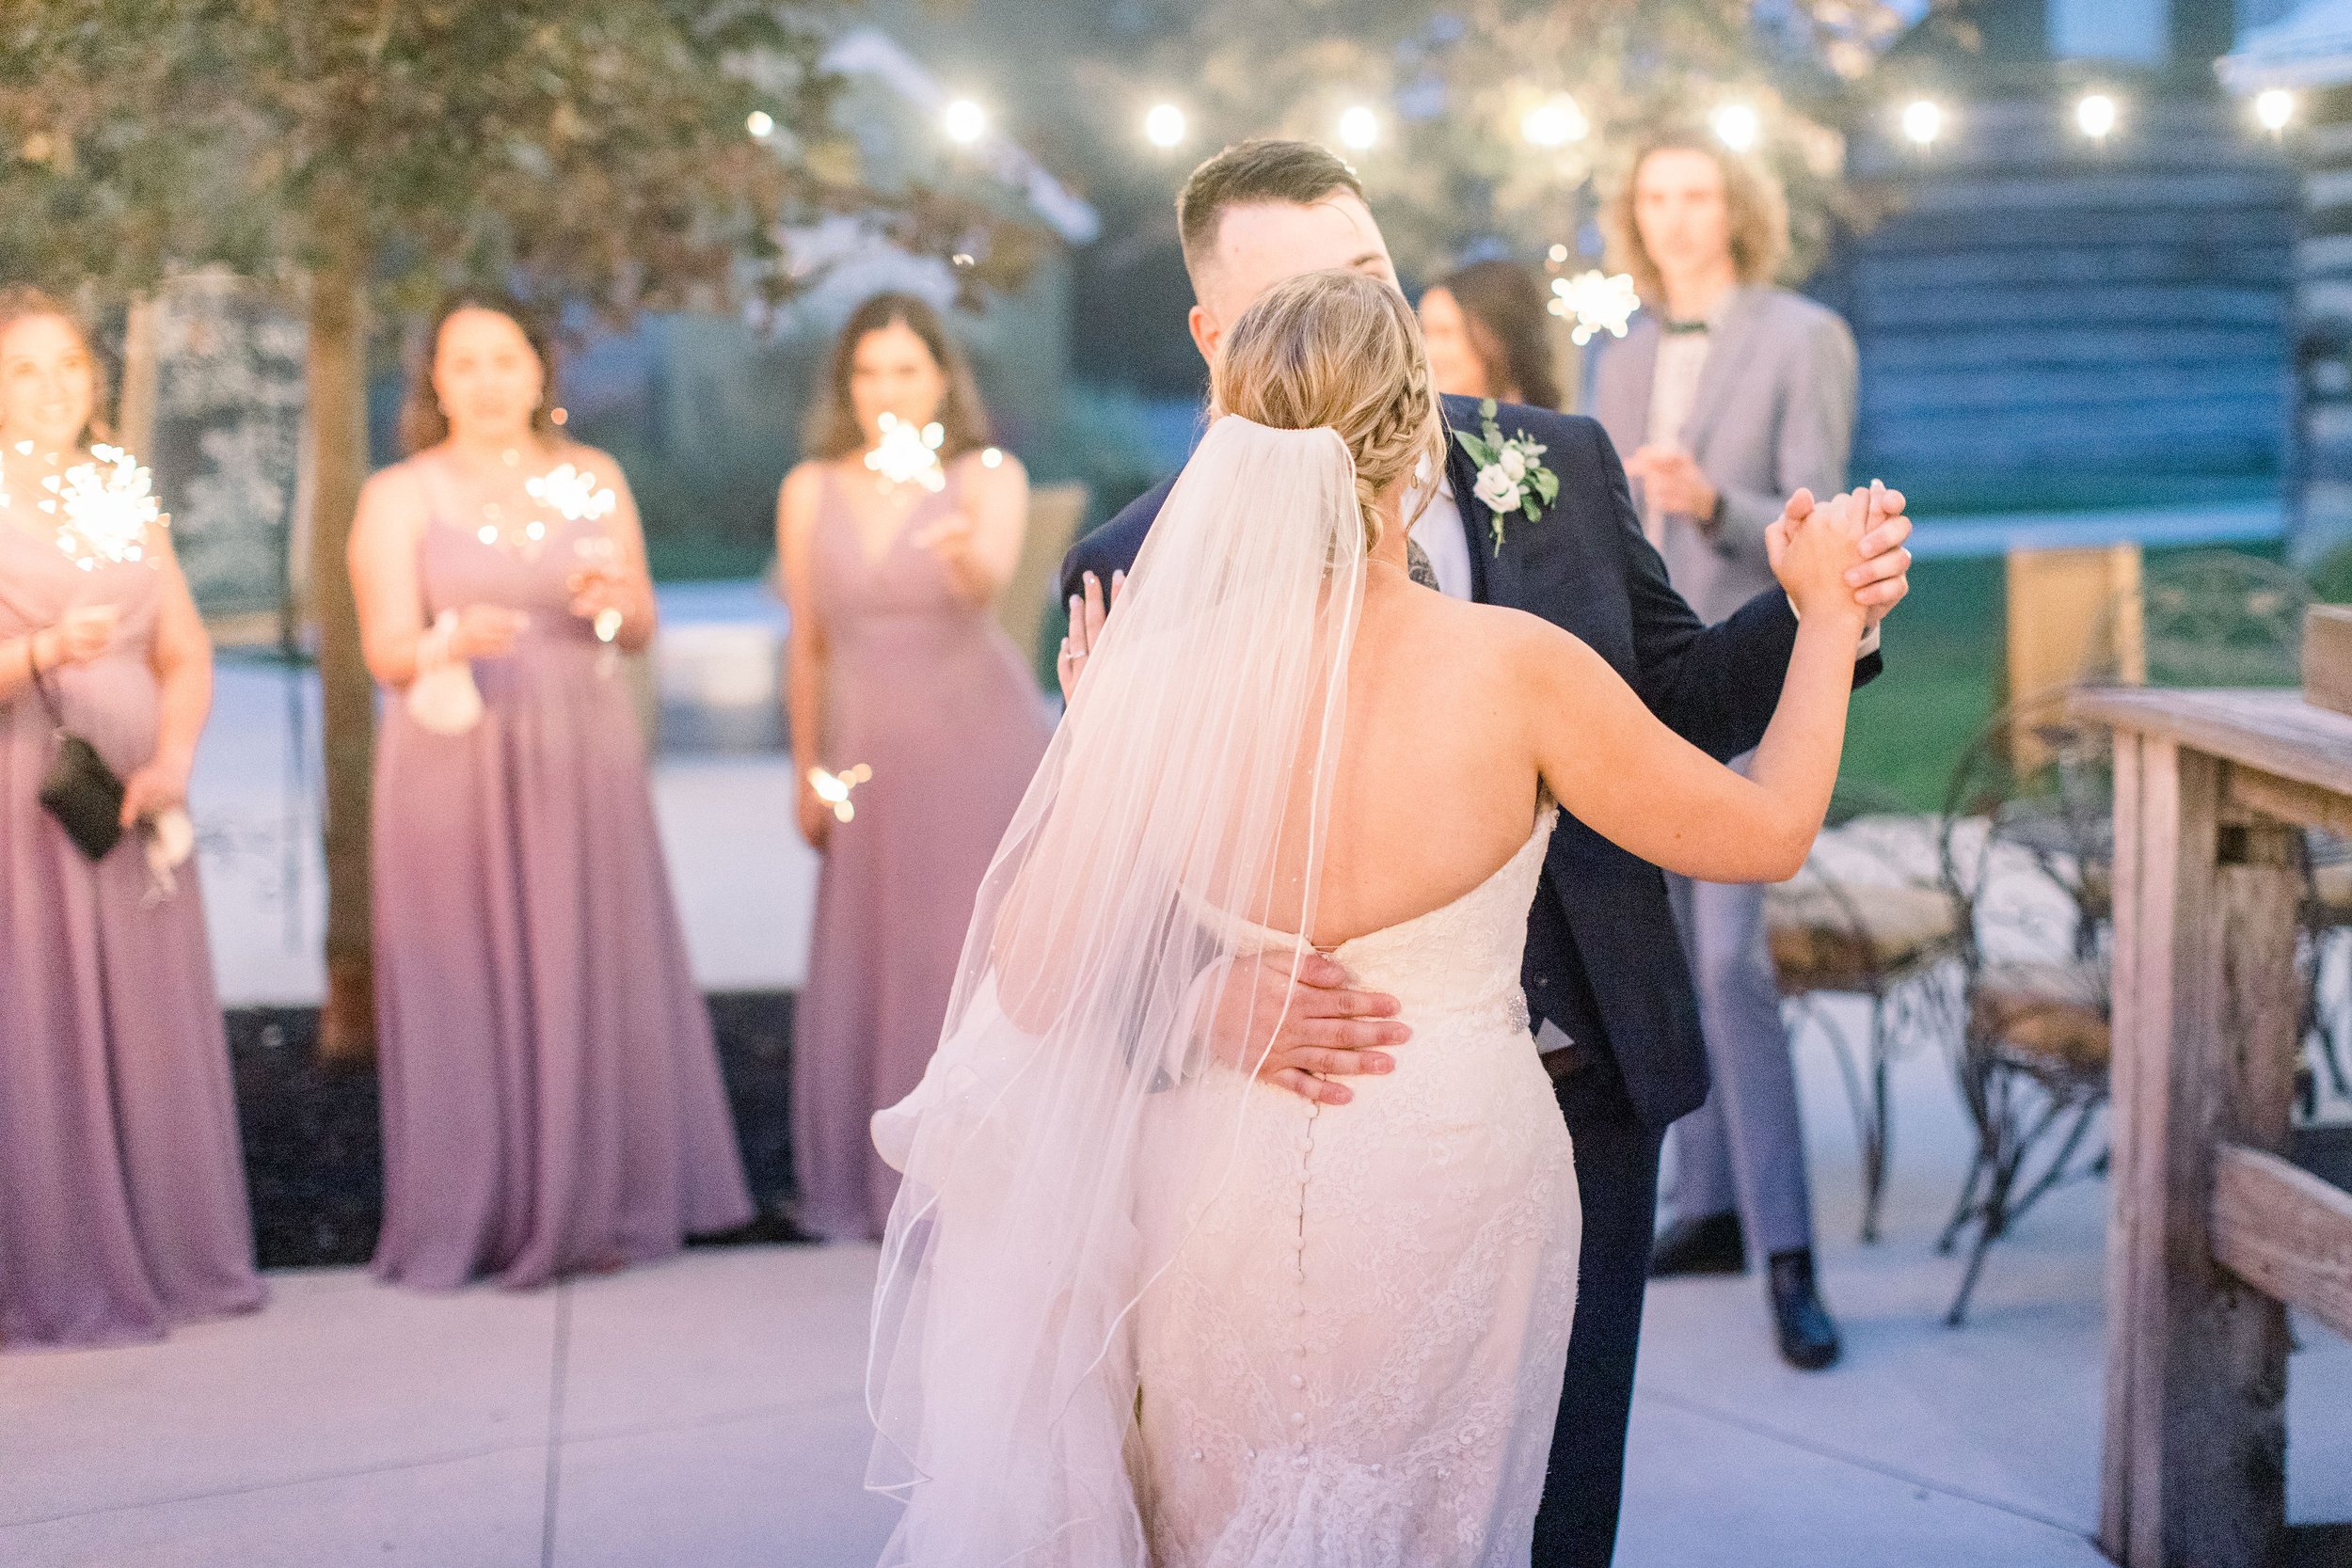  With lights above them, a bride and groom share their first dance by Chelsea Mason Photography. first dance as husband and wife #StonefieldEstates #Ontarioweddings #Chelseamasonphotography #Chelseamasonengagements #Ontarioweddingphotographers 